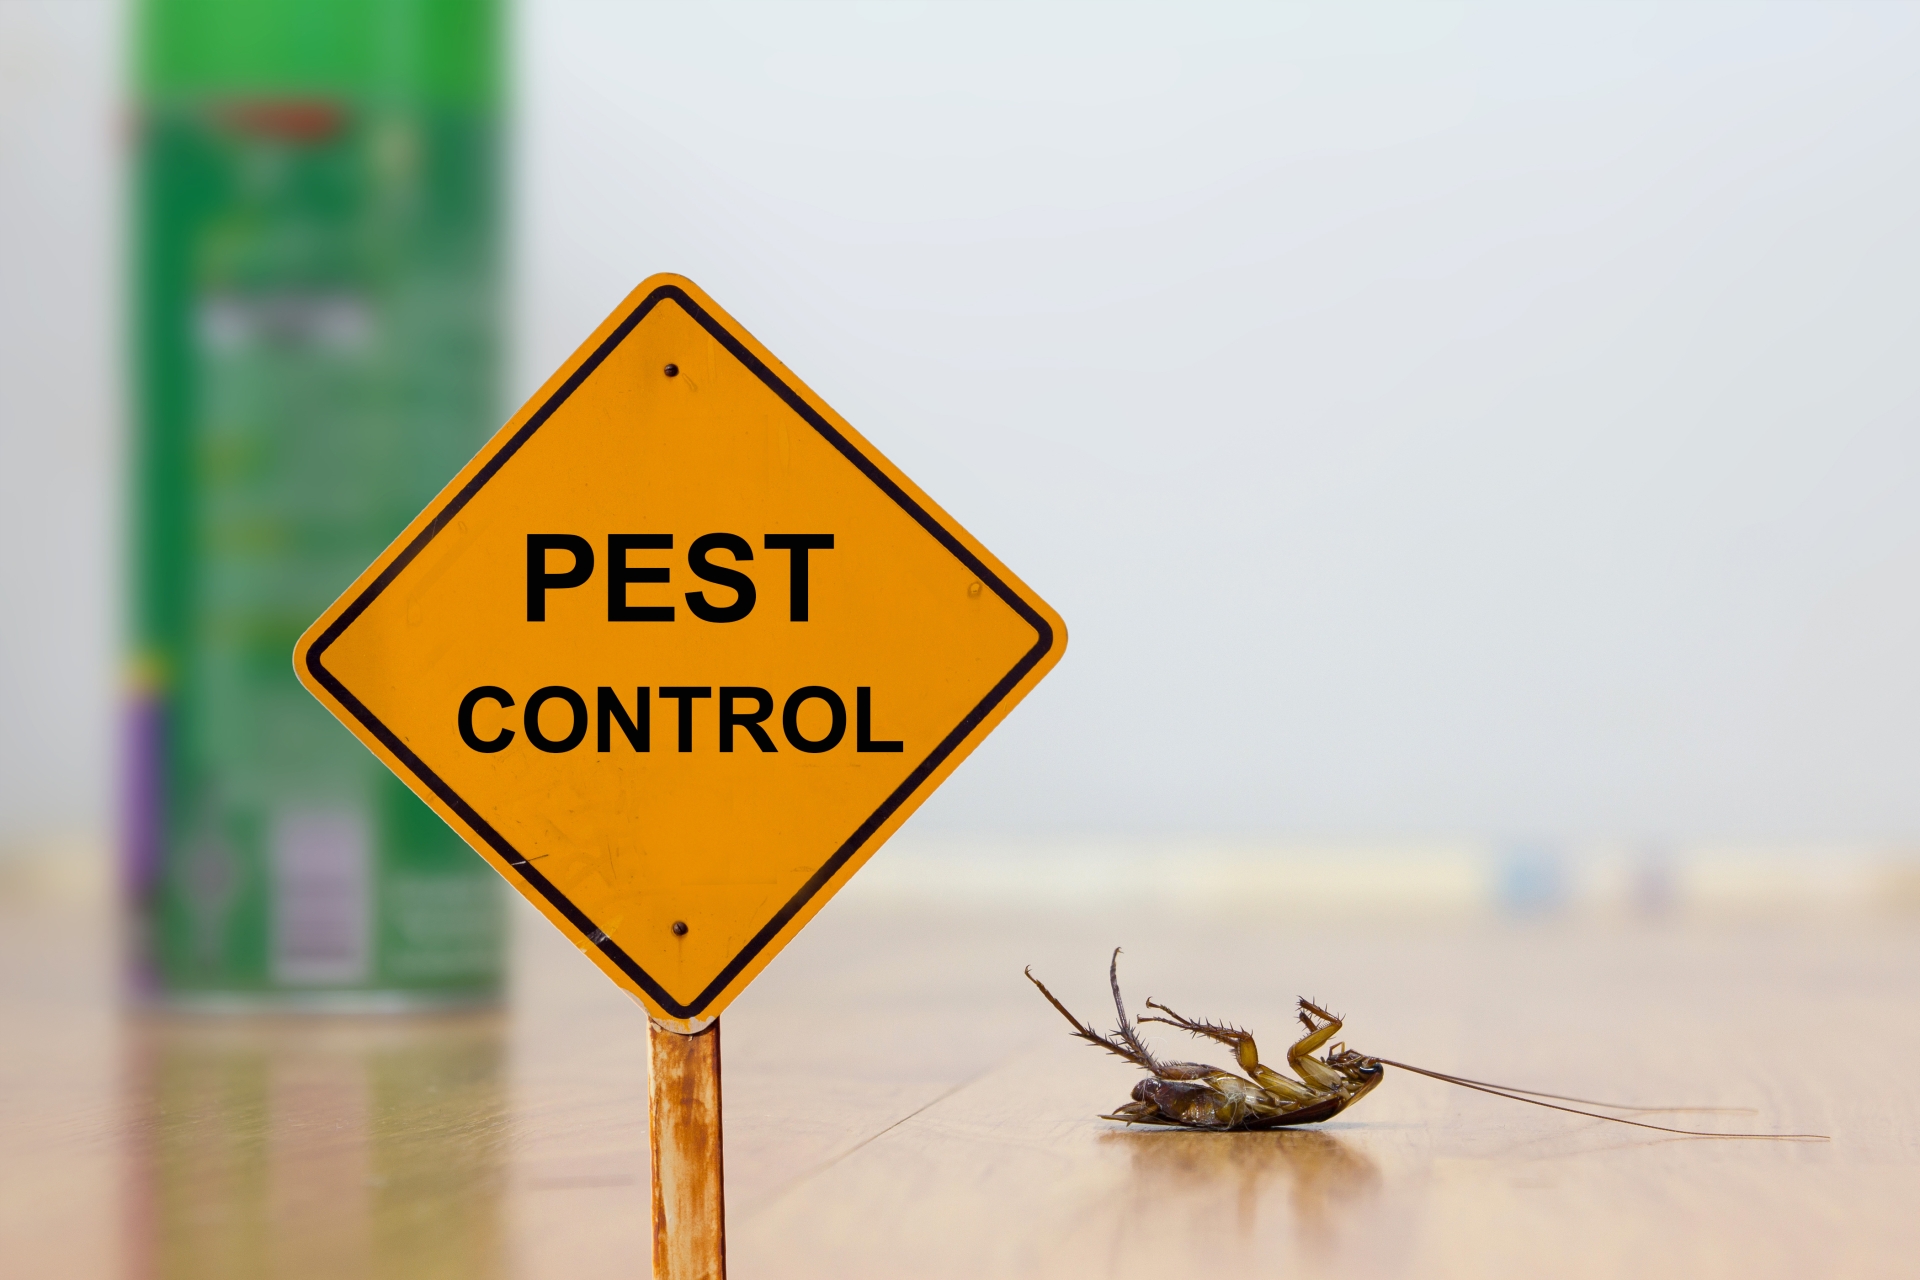 24 Hour Pest Control, Pest Control in Potters Bar, Cuffley, Northaw, EN6. Call Now 020 8166 9746